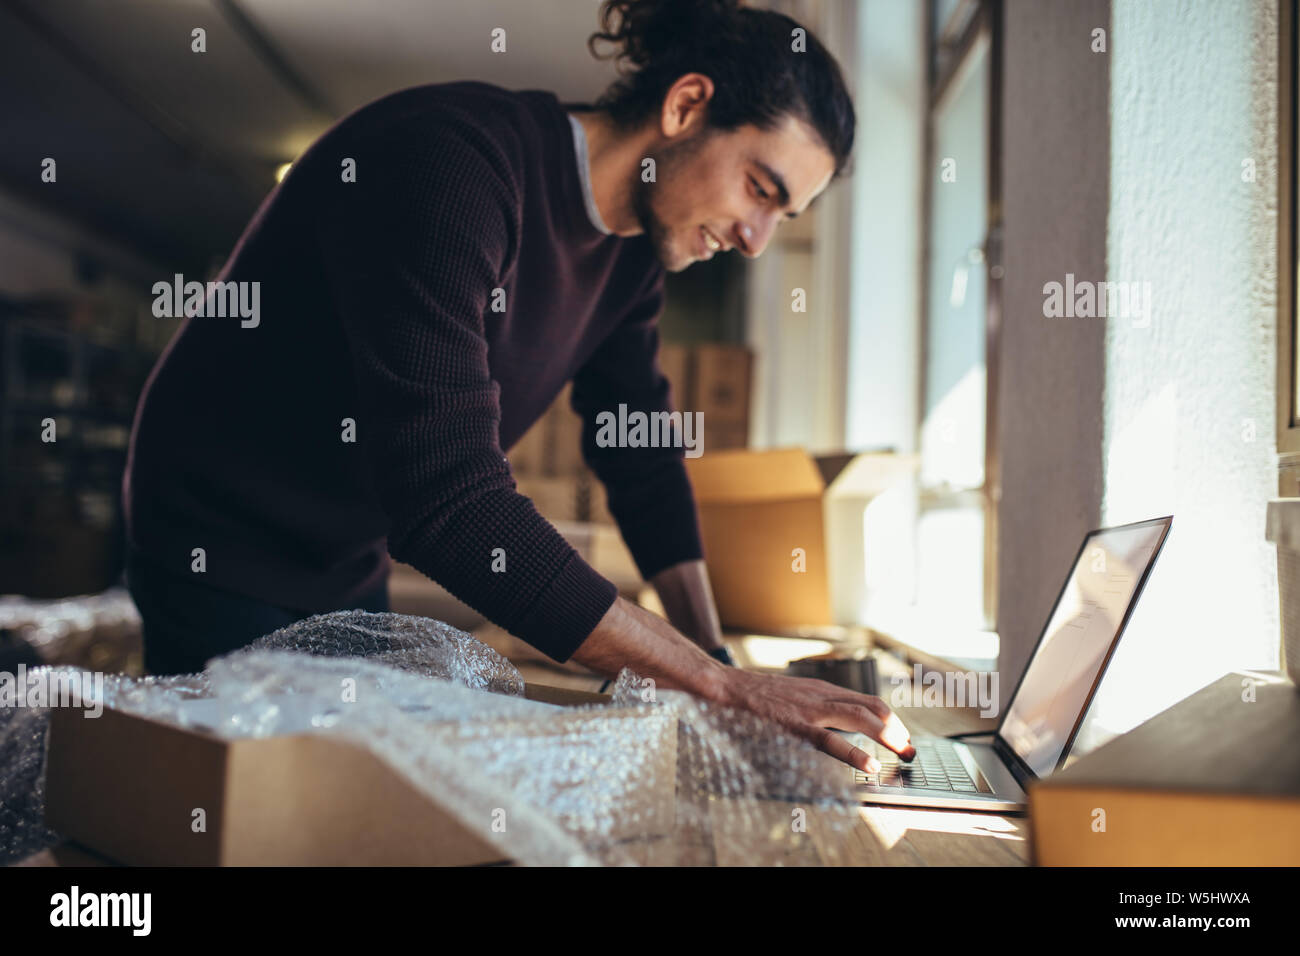 Young man working on laptop with parcel on the side. Drop shipping business owner updating the delivery status of the shipment. Stock Photo